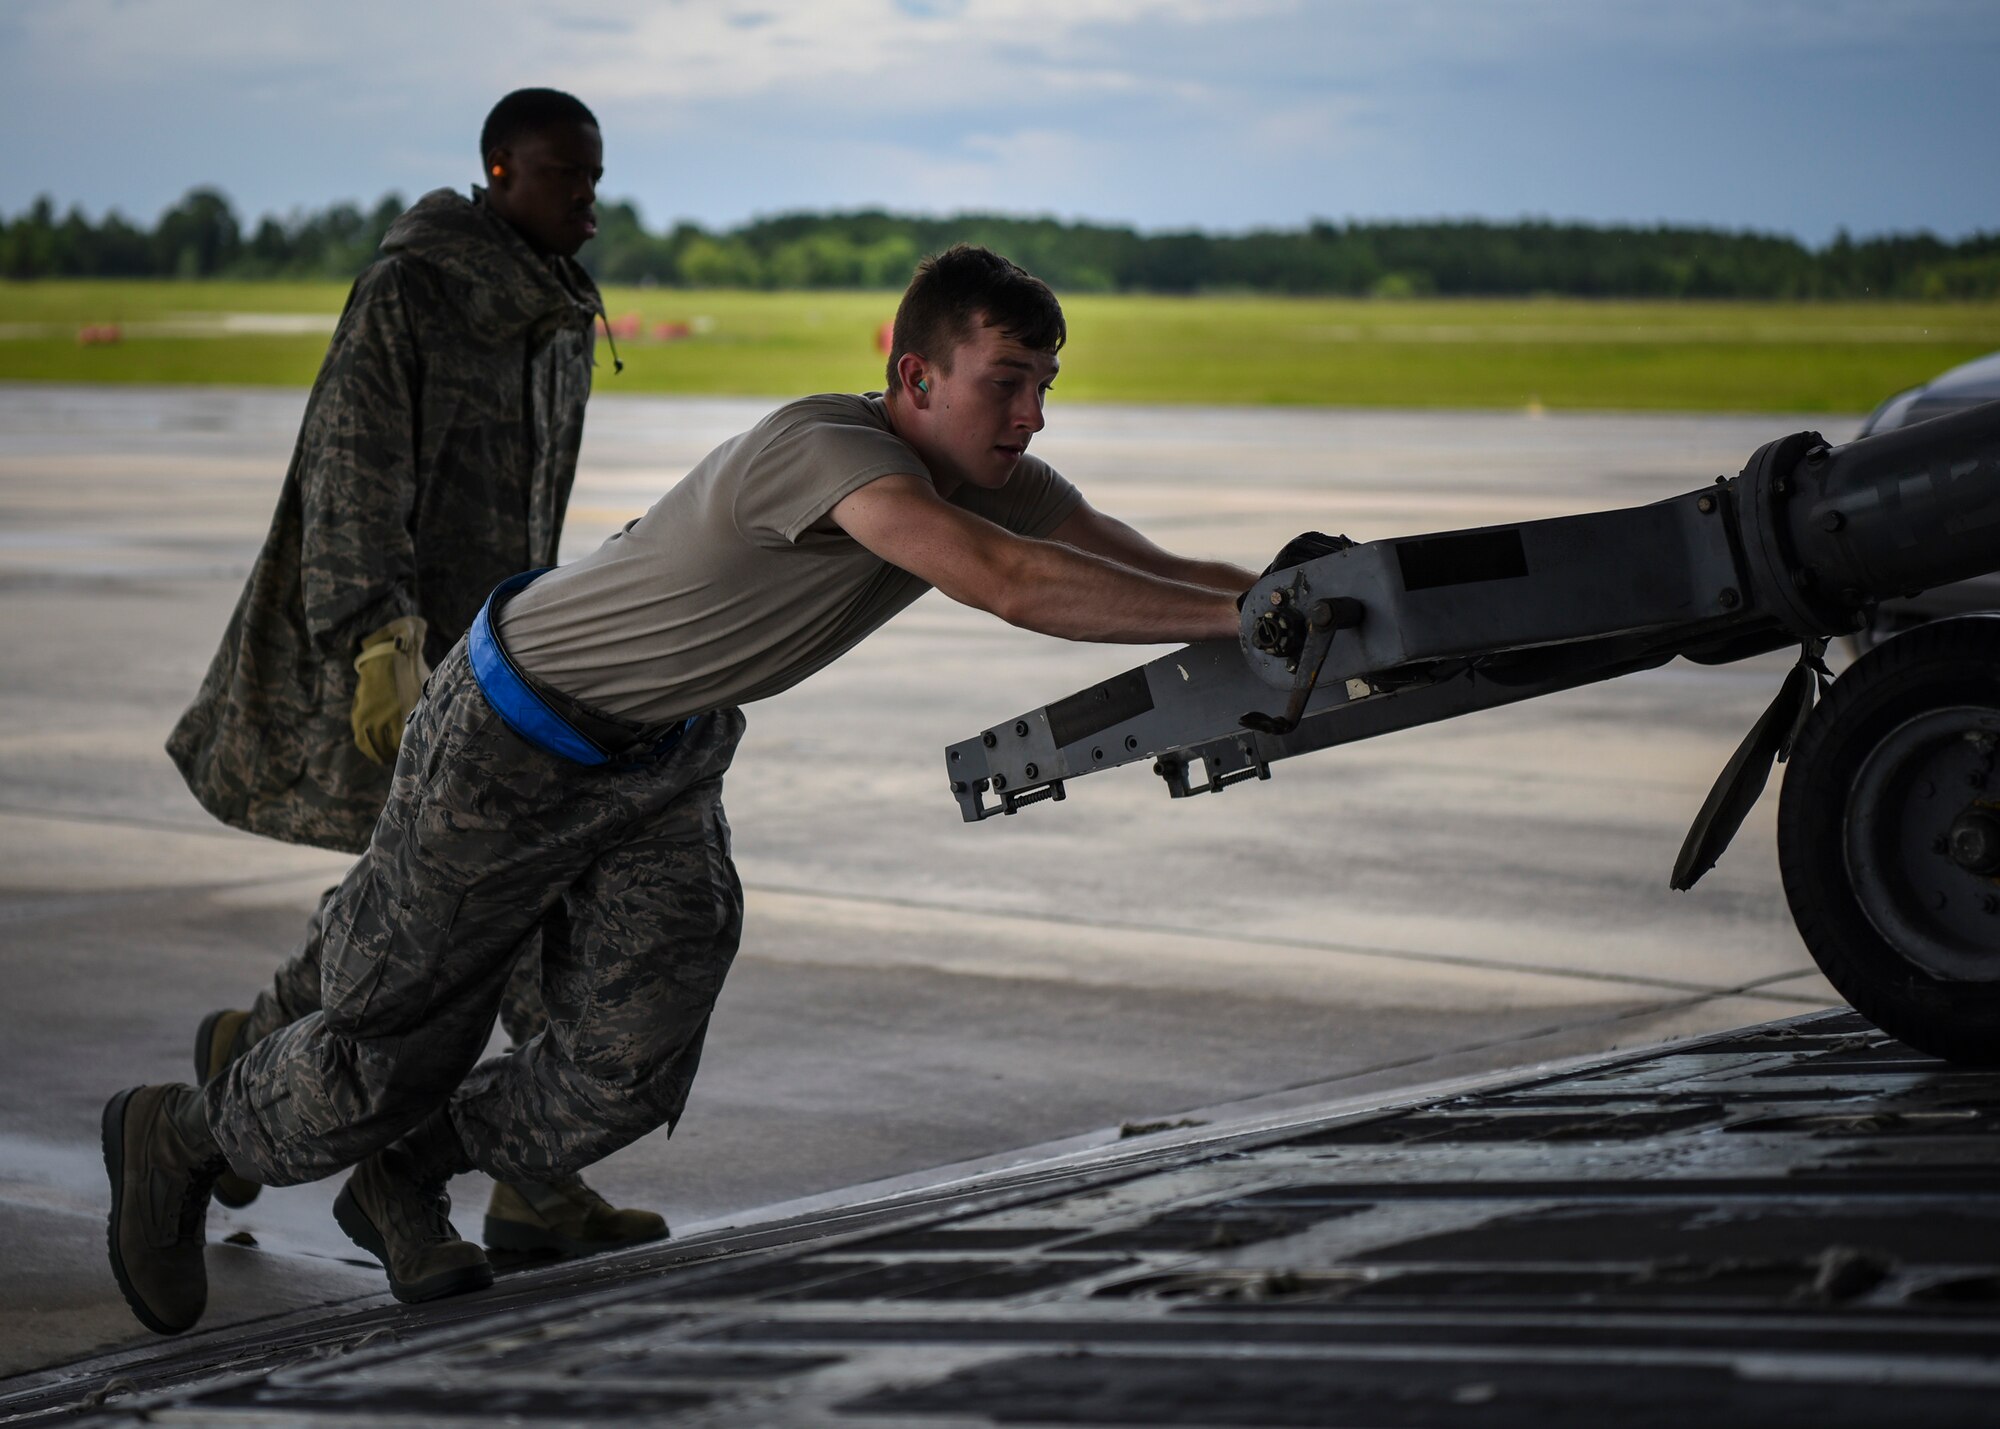 Airman 1st Class Alex White, 23d Logistics Readiness Squadron air terminal specialist, pushes a cart into a C-17 Globemaster III, July 5, 2018, at Moody Air Force Base, Ga.  Airmen loaded approximately 68,000 pounds of cargo onto a C-17 to aid the 75th Fighter Squadron (FS) prior to a deployment. The 75th FS and supporting units recently deployed to an undisclosed location in support of Operation Spartan Shield. (U.S. Air Force photo by Airman Taryn Butler)